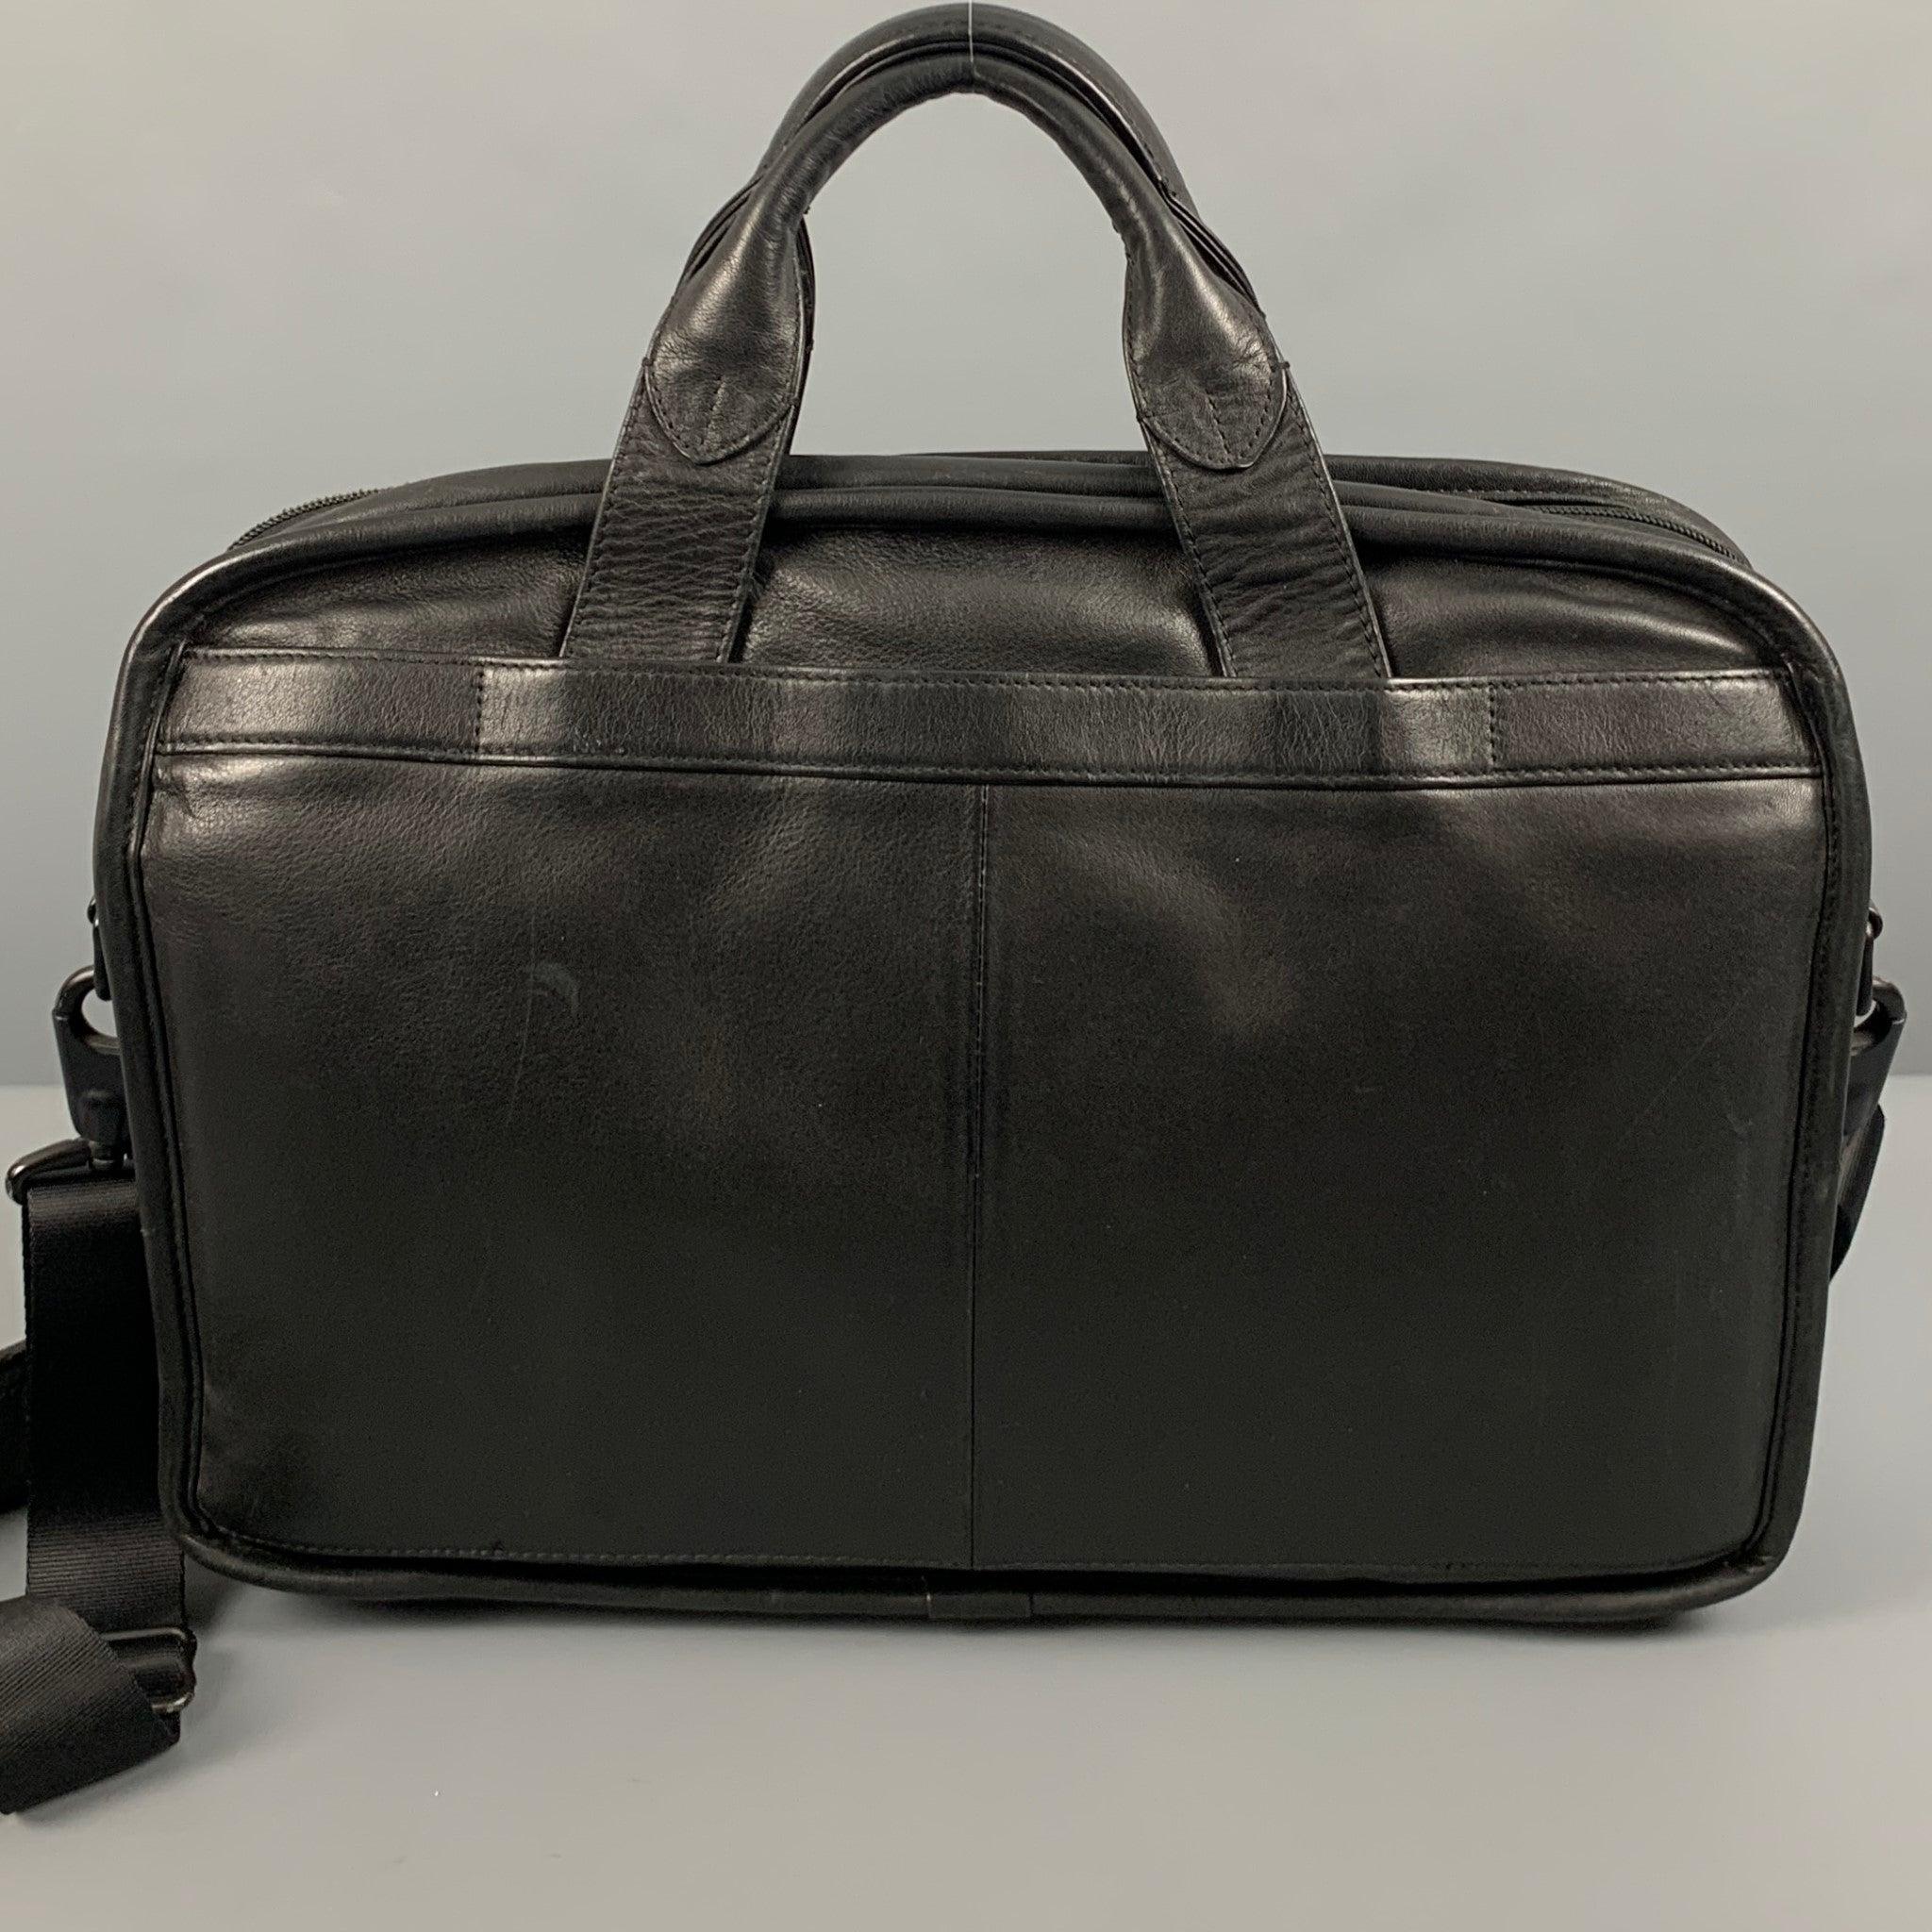 TUMI Grey Leather Briefcase Bag In Excellent Condition For Sale In San Francisco, CA